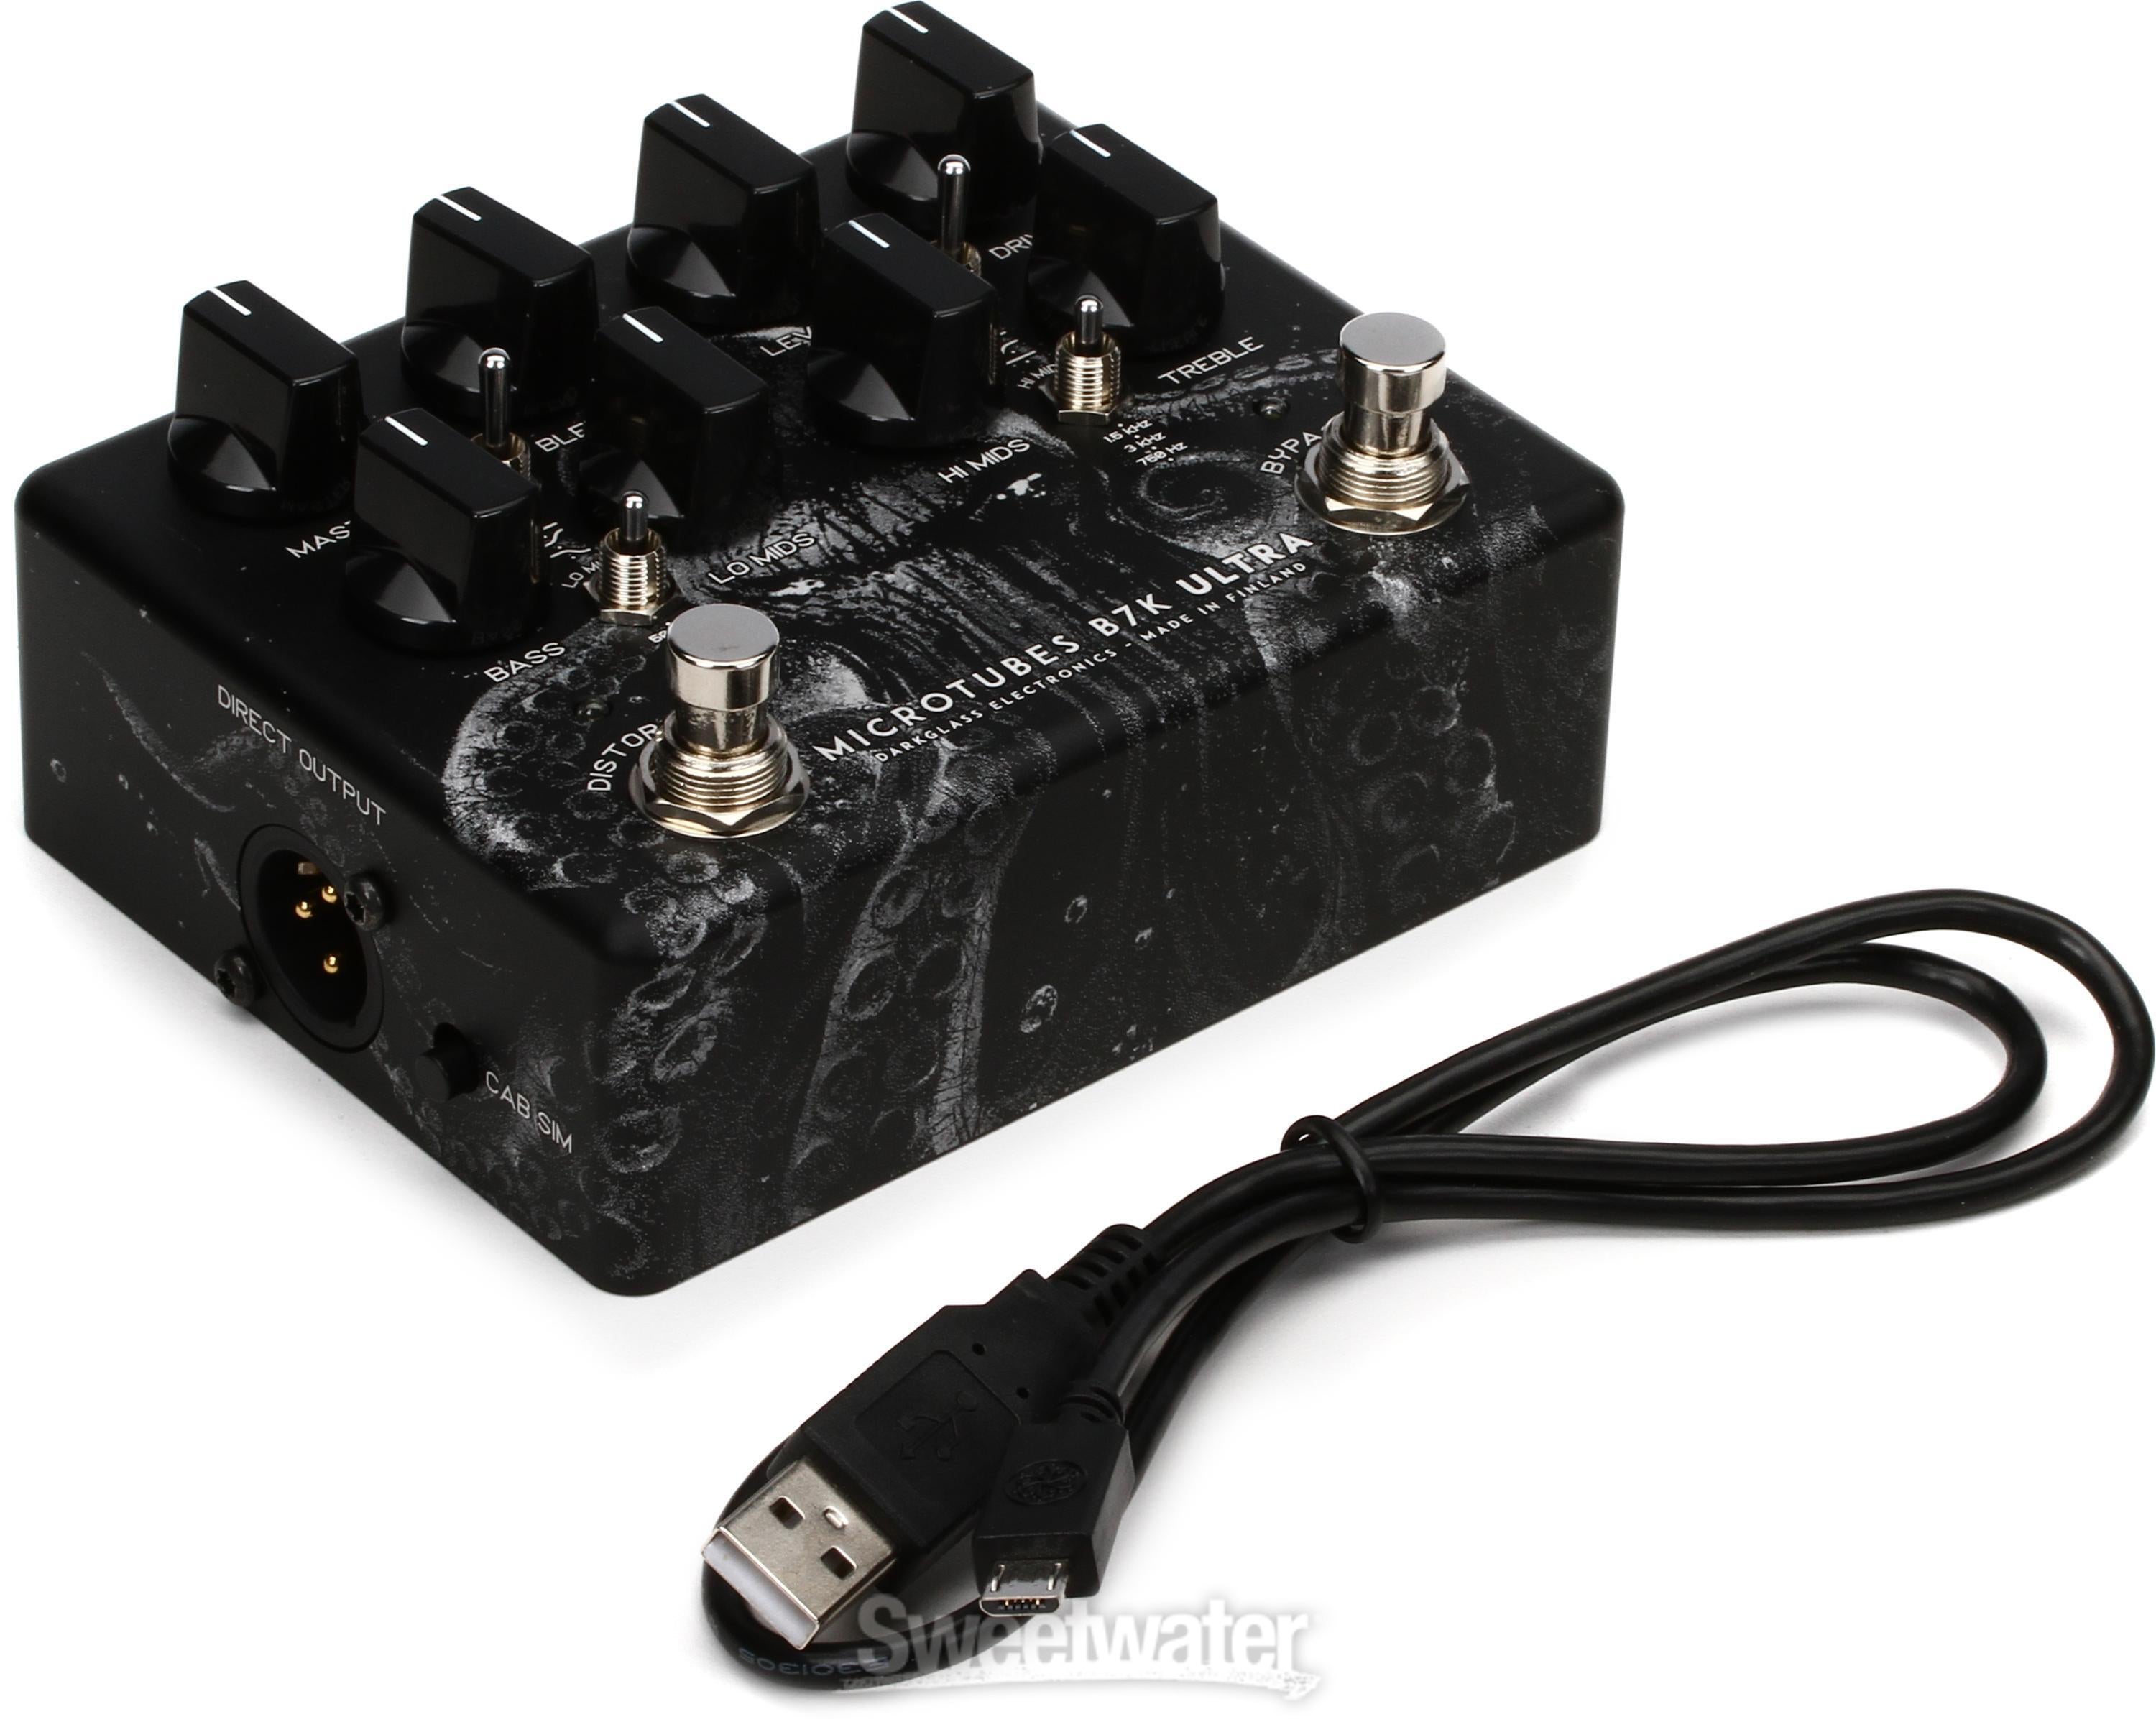 Darkglass Microtubes B7K Ultra V2 Bass Preamp Pedal with Aux In - The SQUID  Limited Edition